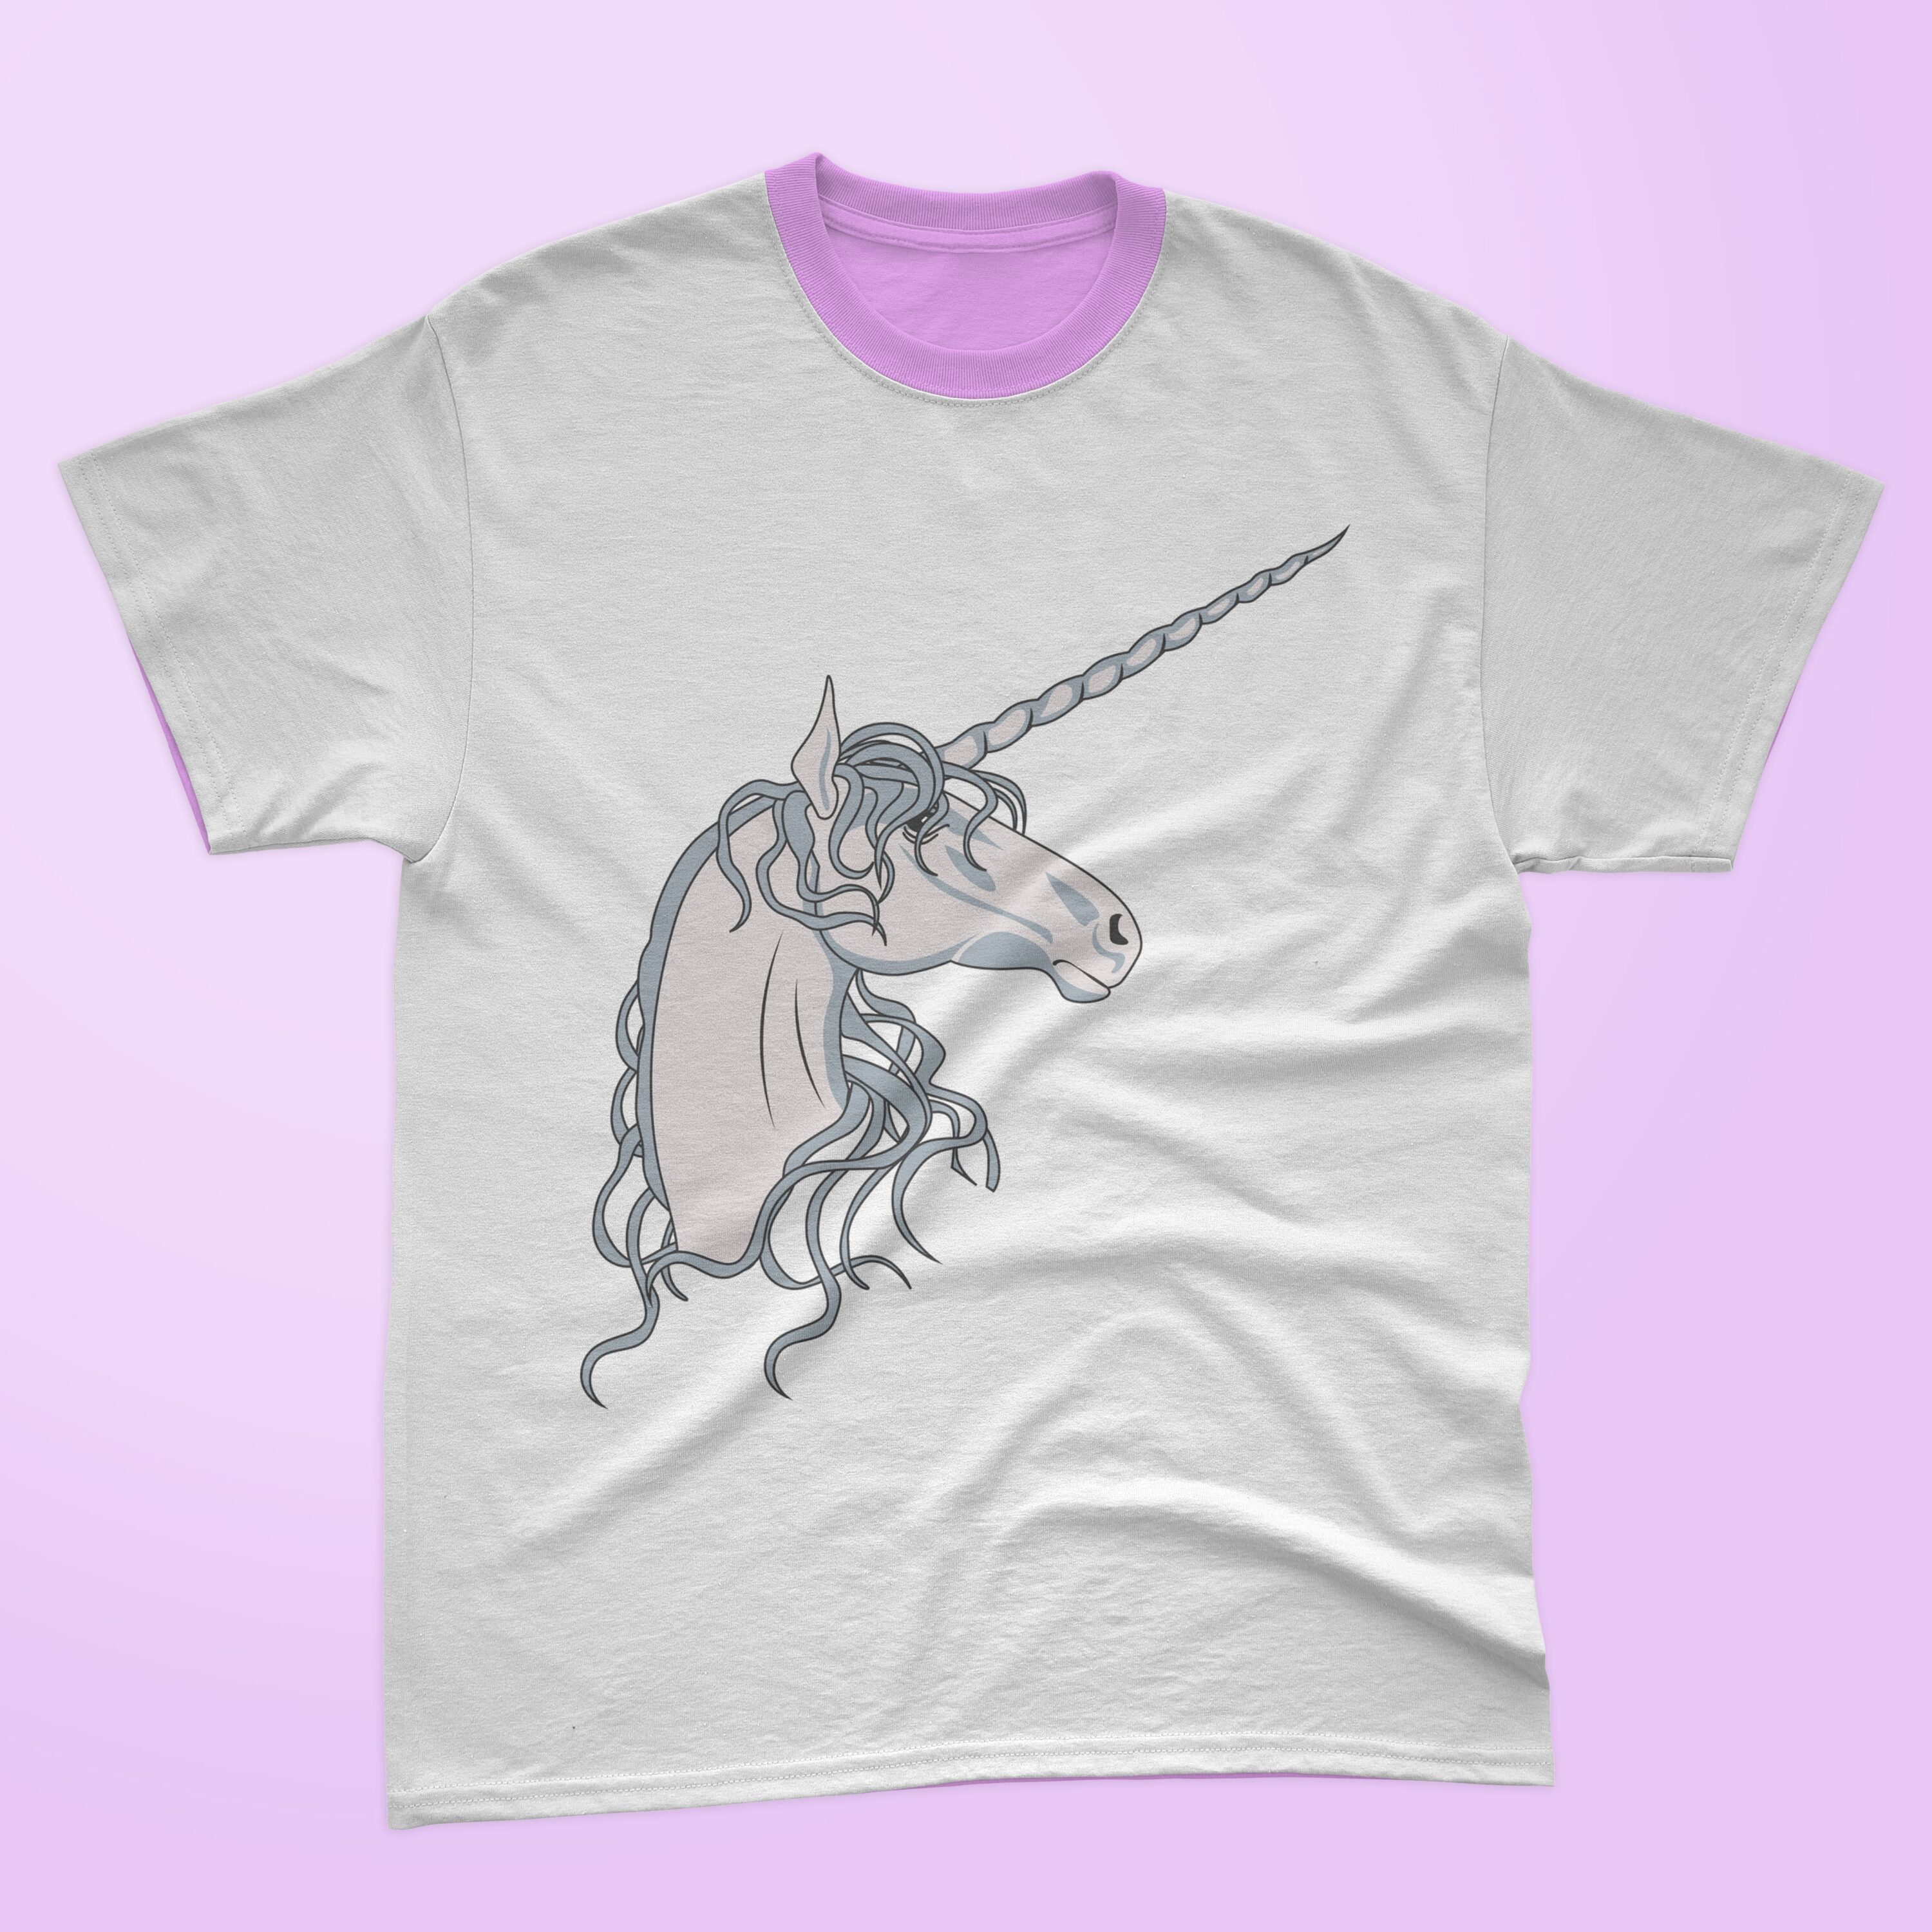 White t-shirt with a lavender collar and unicorn head on a lavender background.